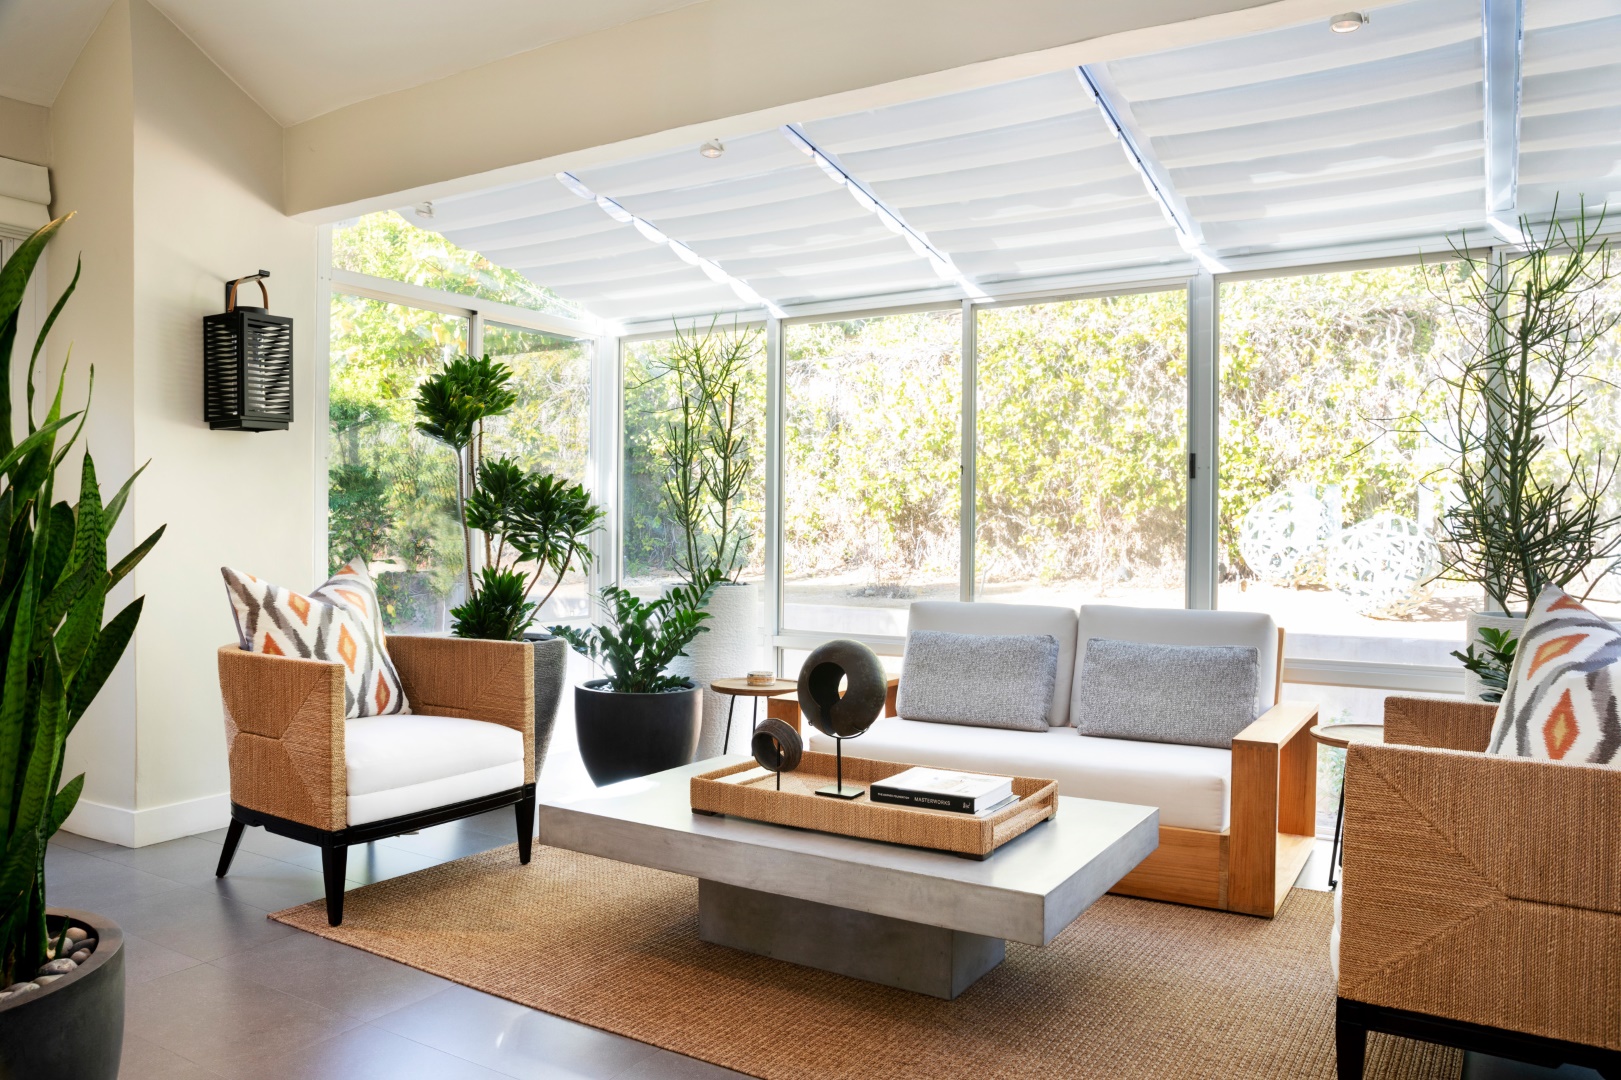 16 Contemporary Sunroom Designs That Will Make You Want to Stay Forever